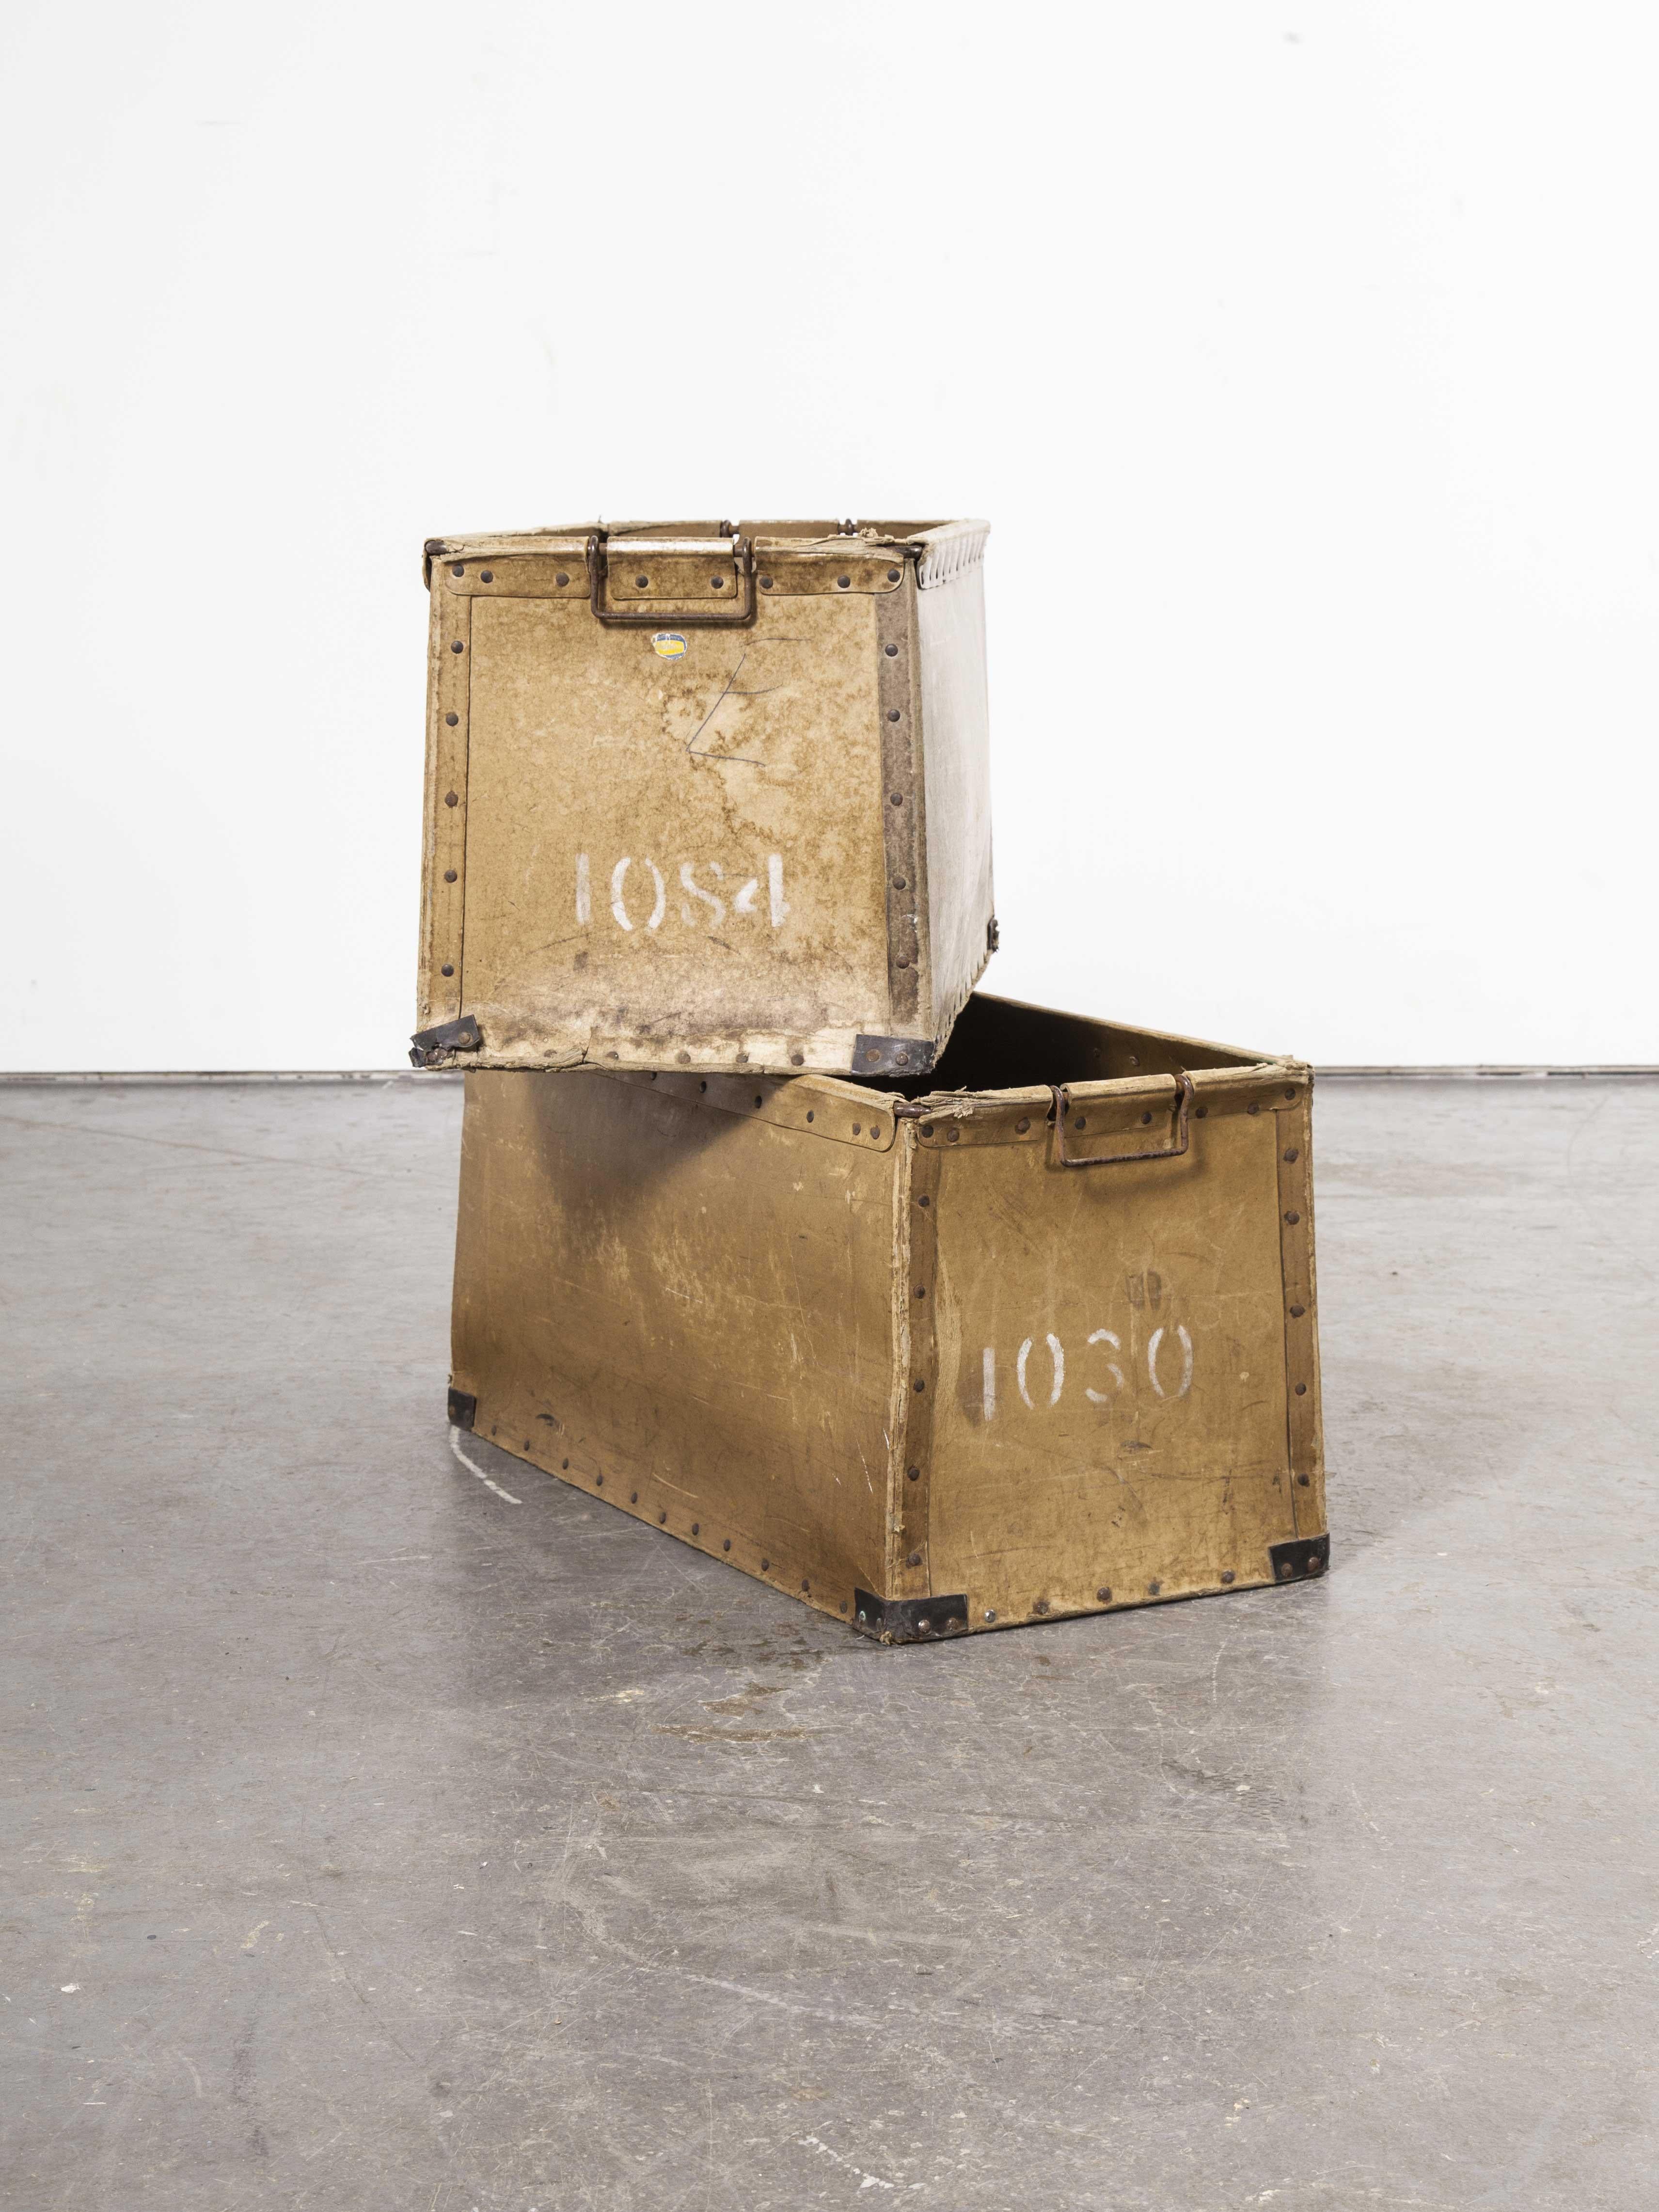 1950s pair of French Vulcanised card Industrial crates

1950s pair of French Vulcanised card Industrial crates. Vulcanised card was the material of choice for heavy duty practical Industrial tote crates. Suroy was the market leader but they were